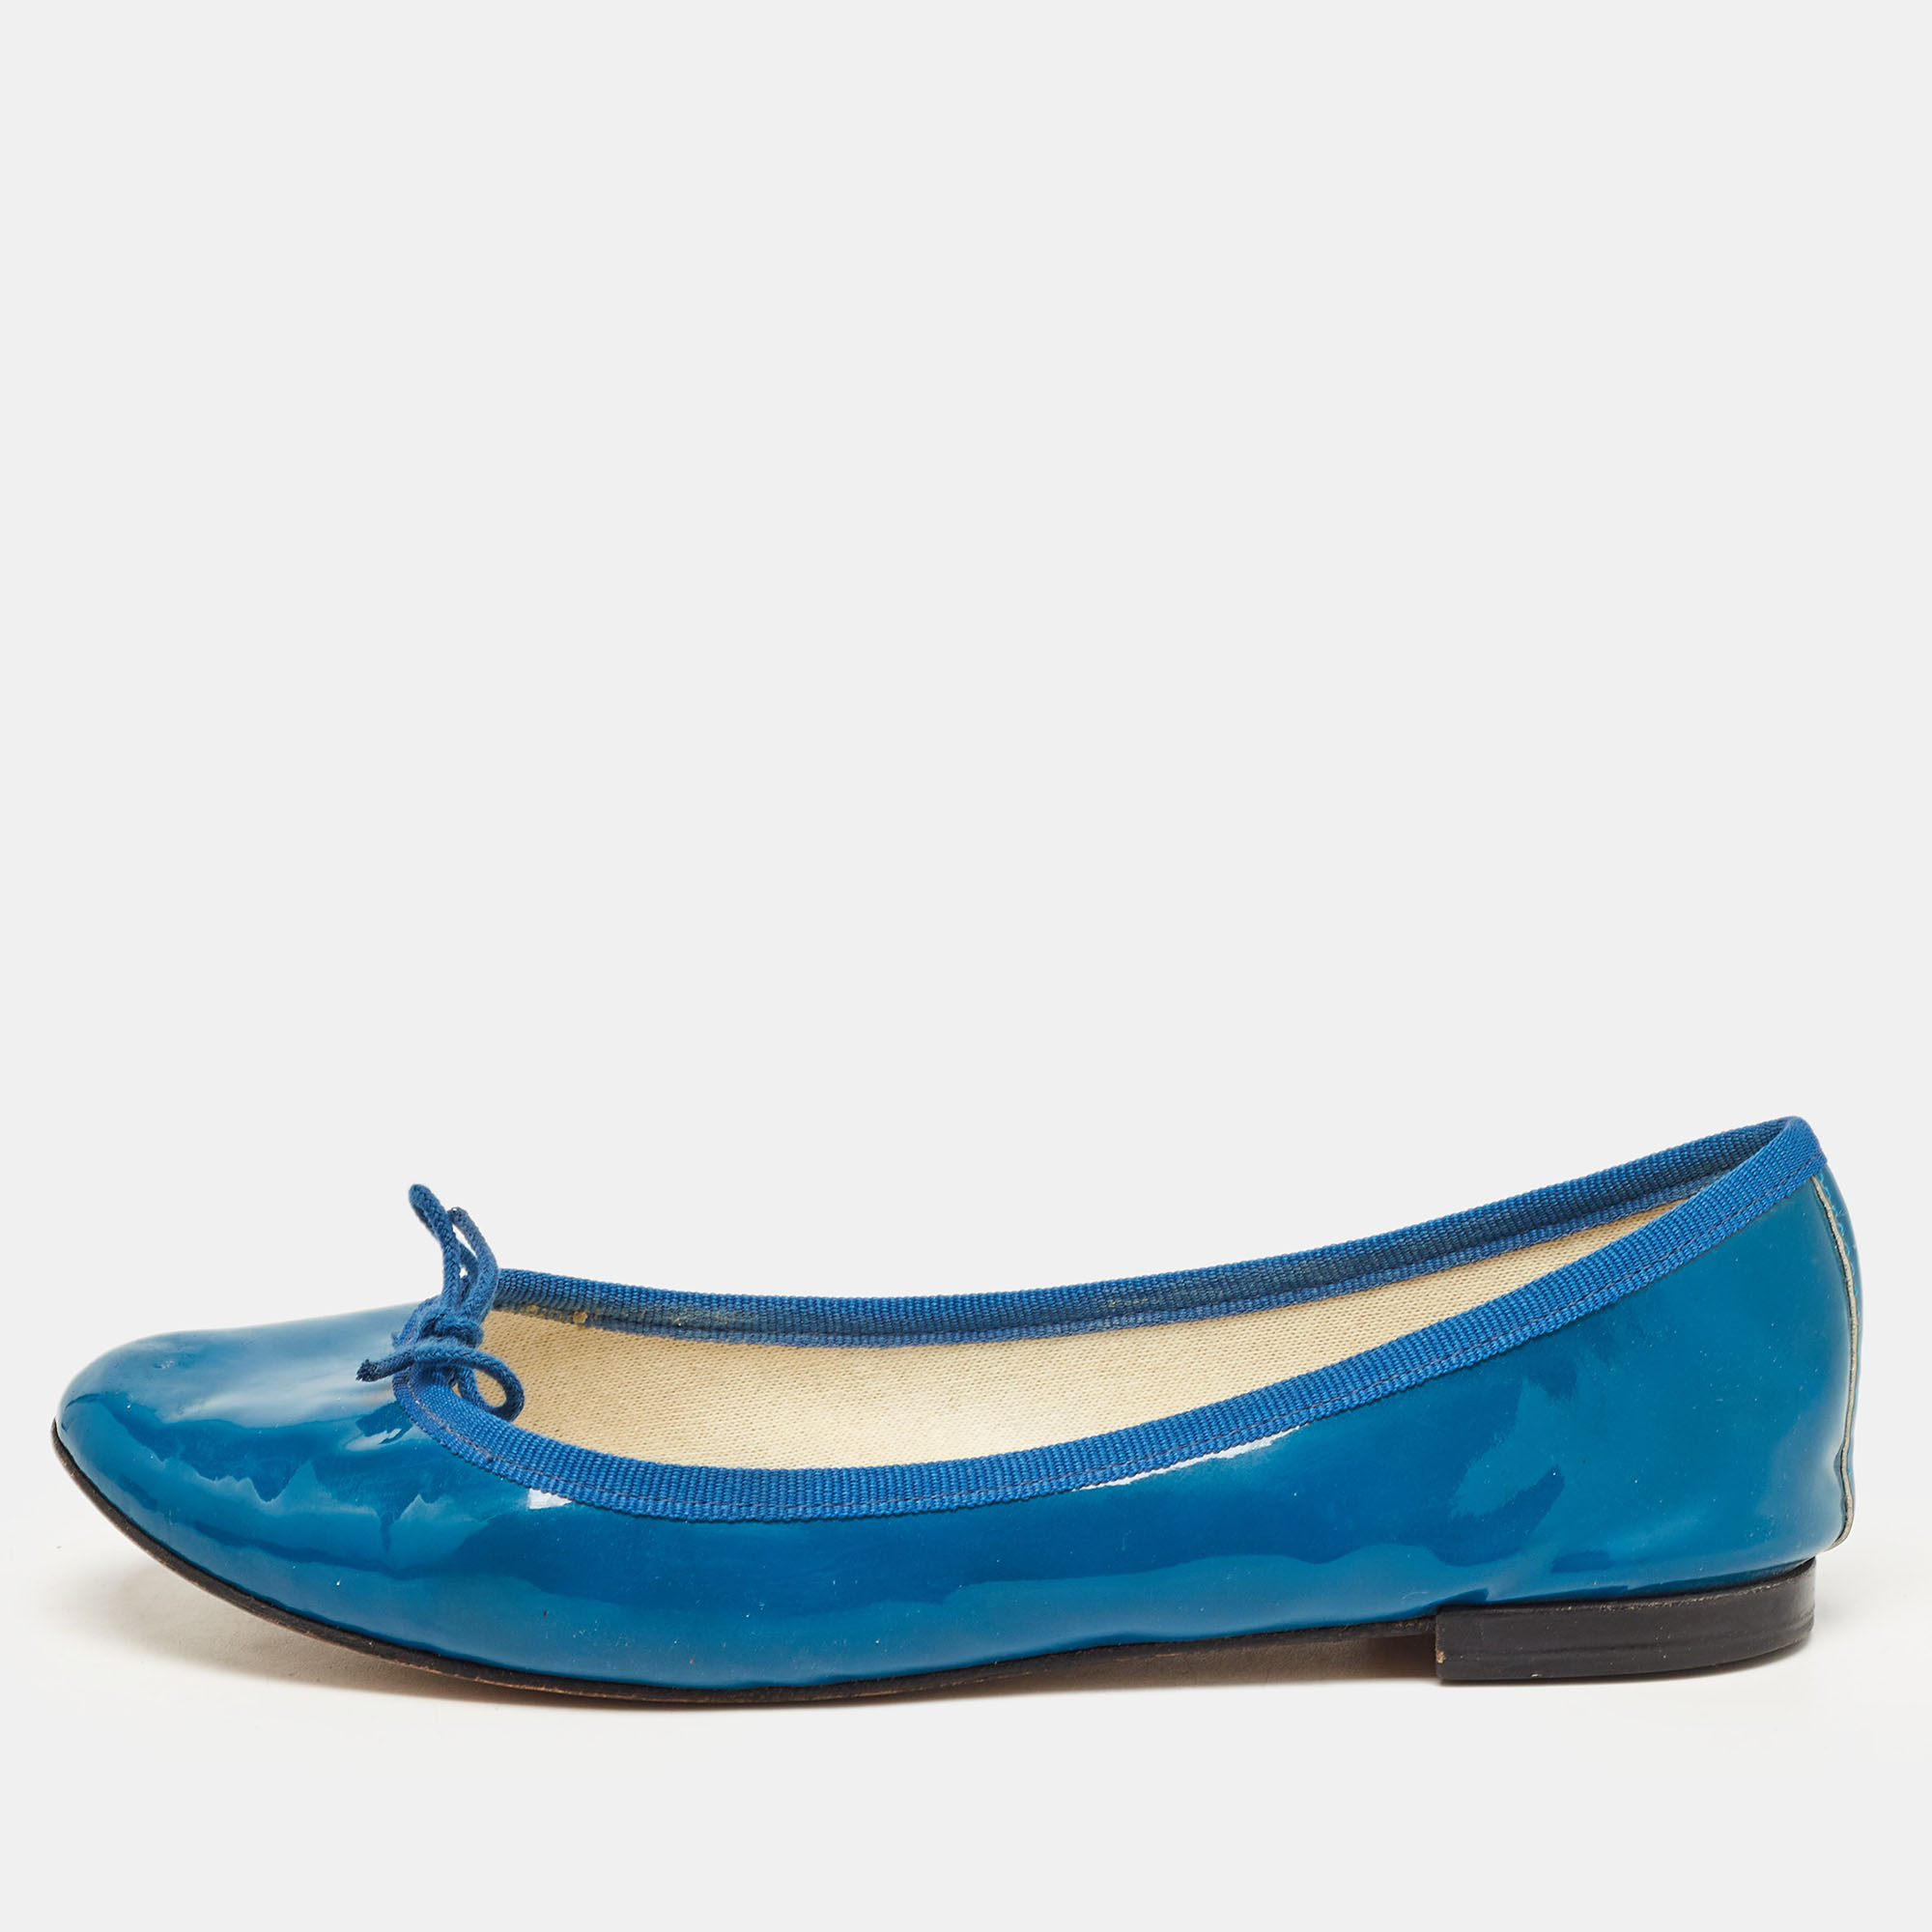 Repetto blue patent leather bow ballet flats size 38